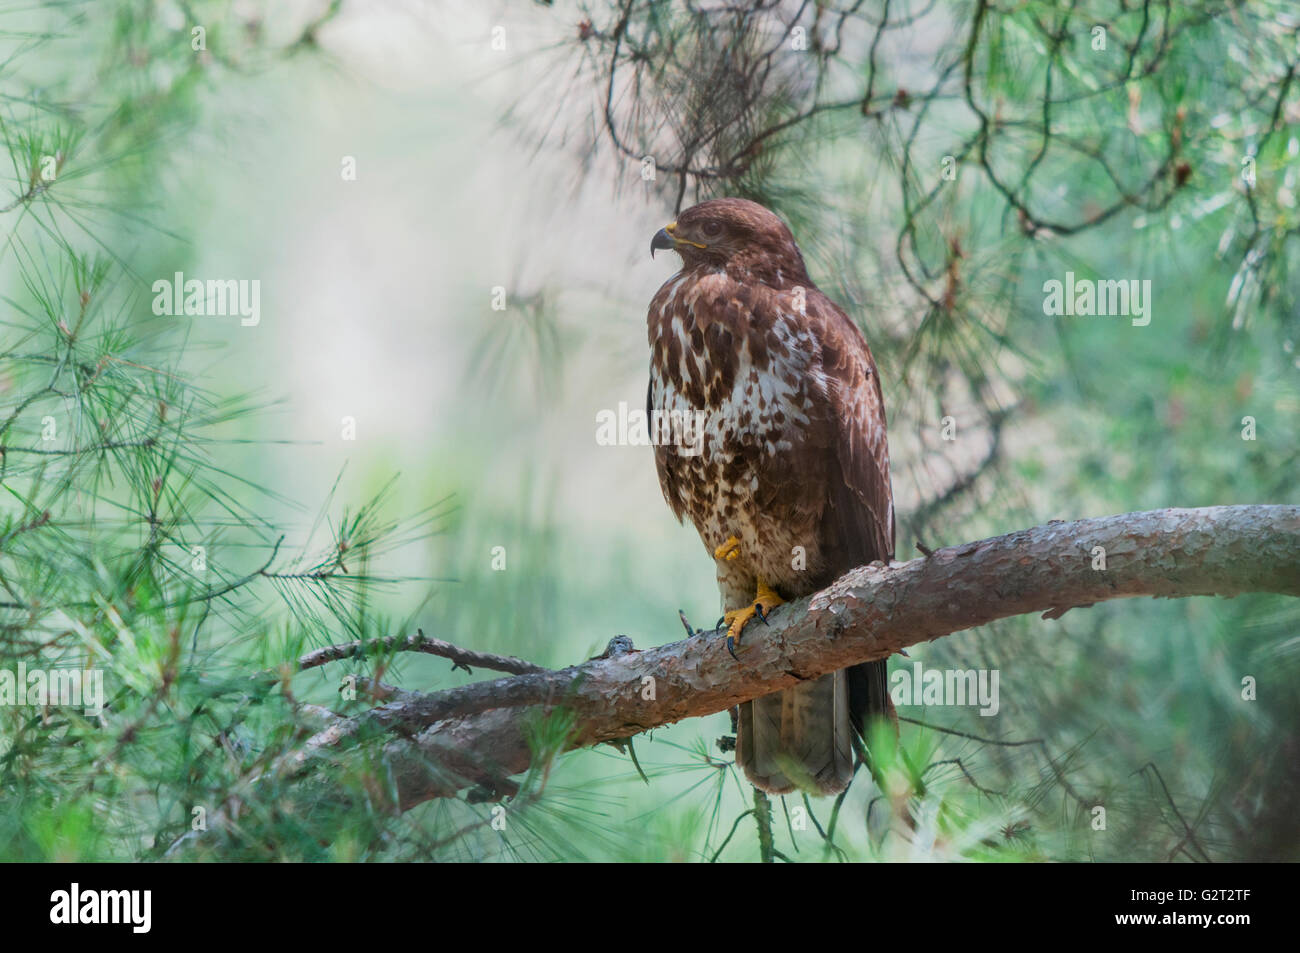 A common buzzard (Buteo buteo) sitting on a pine's branch on one leg Stock Photo